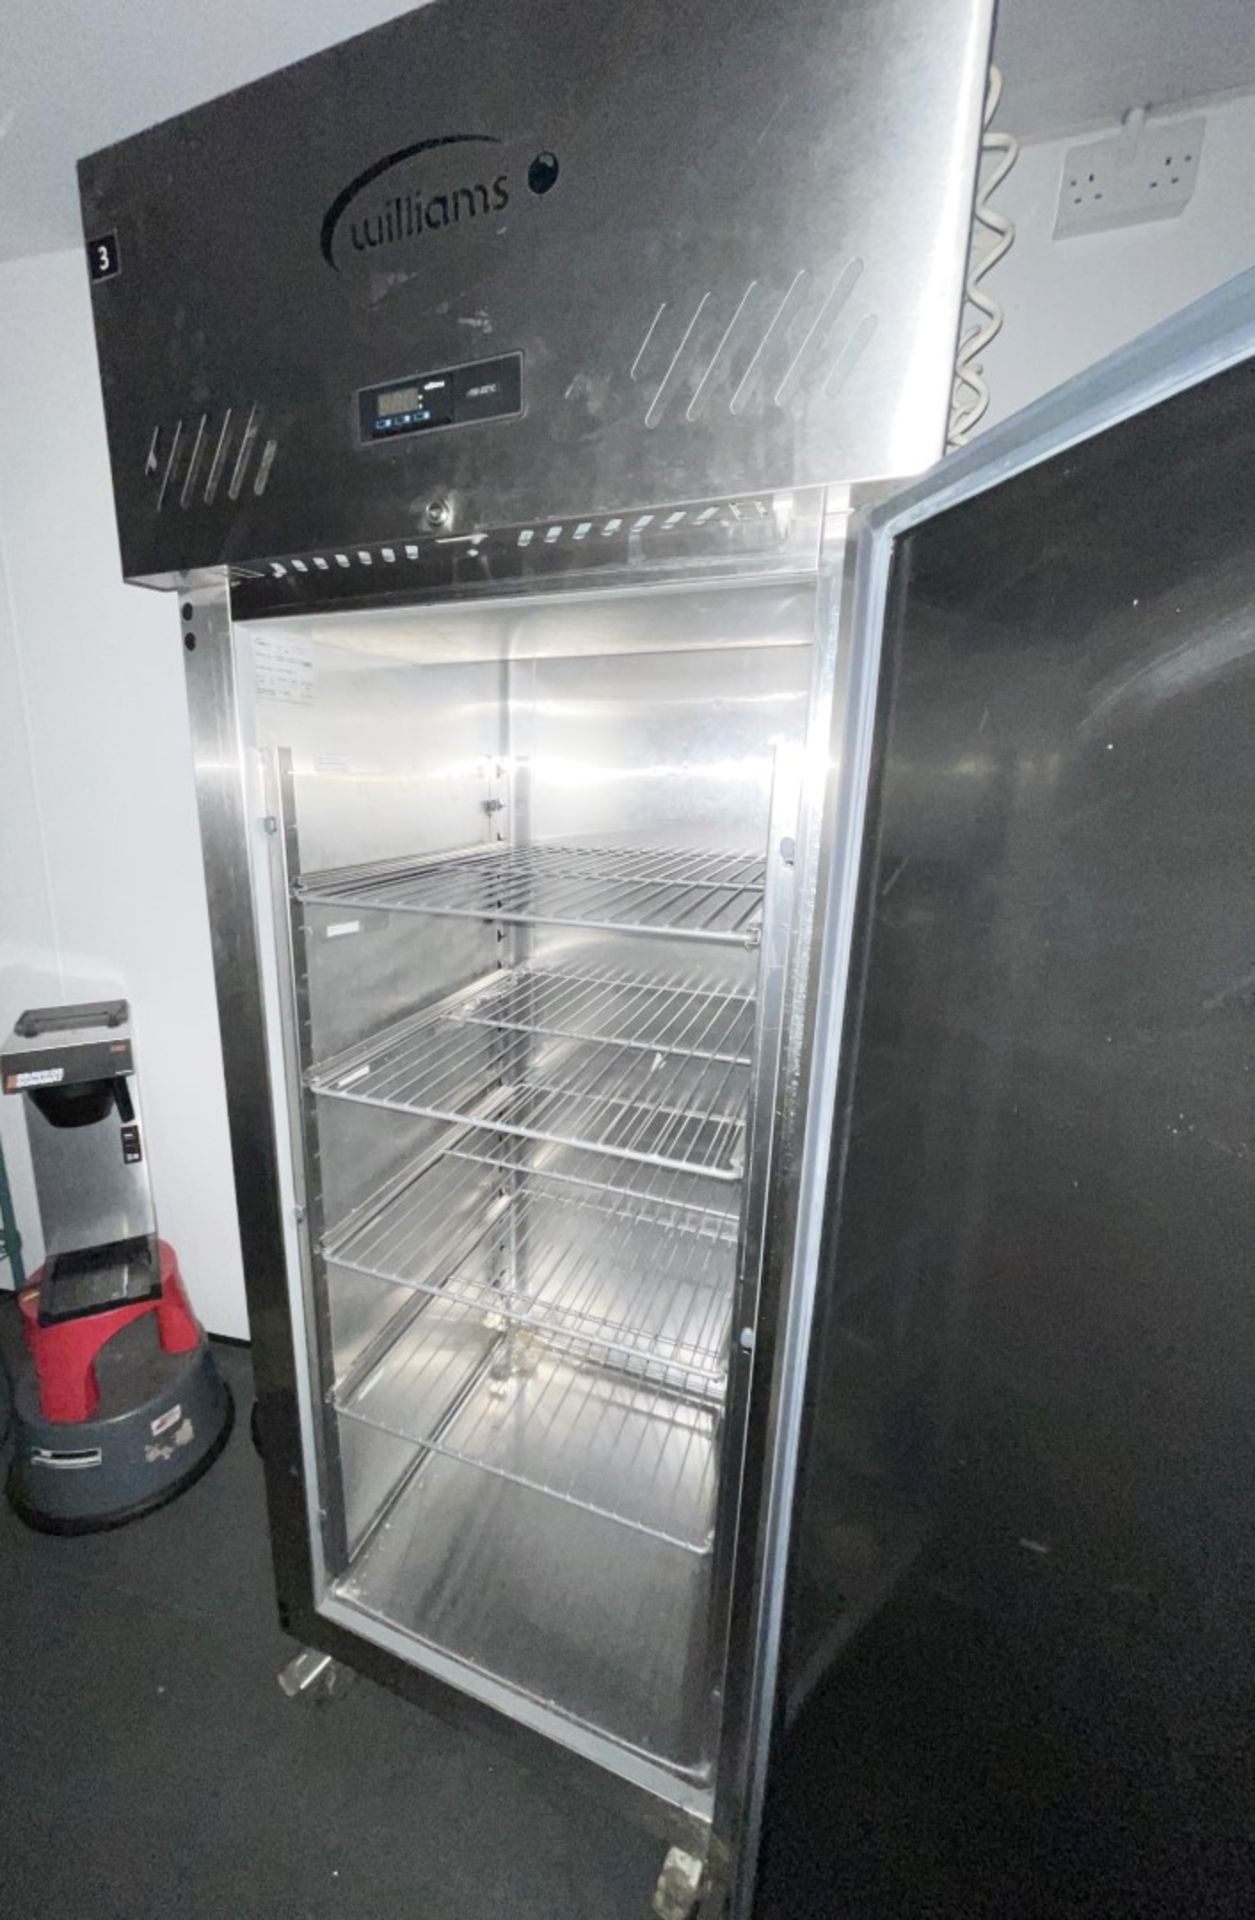 1 x Williams LJ1SA Upright Commercial Freezer With Stainless Steel Exterior - CL670 - Ref: - Image 5 of 6